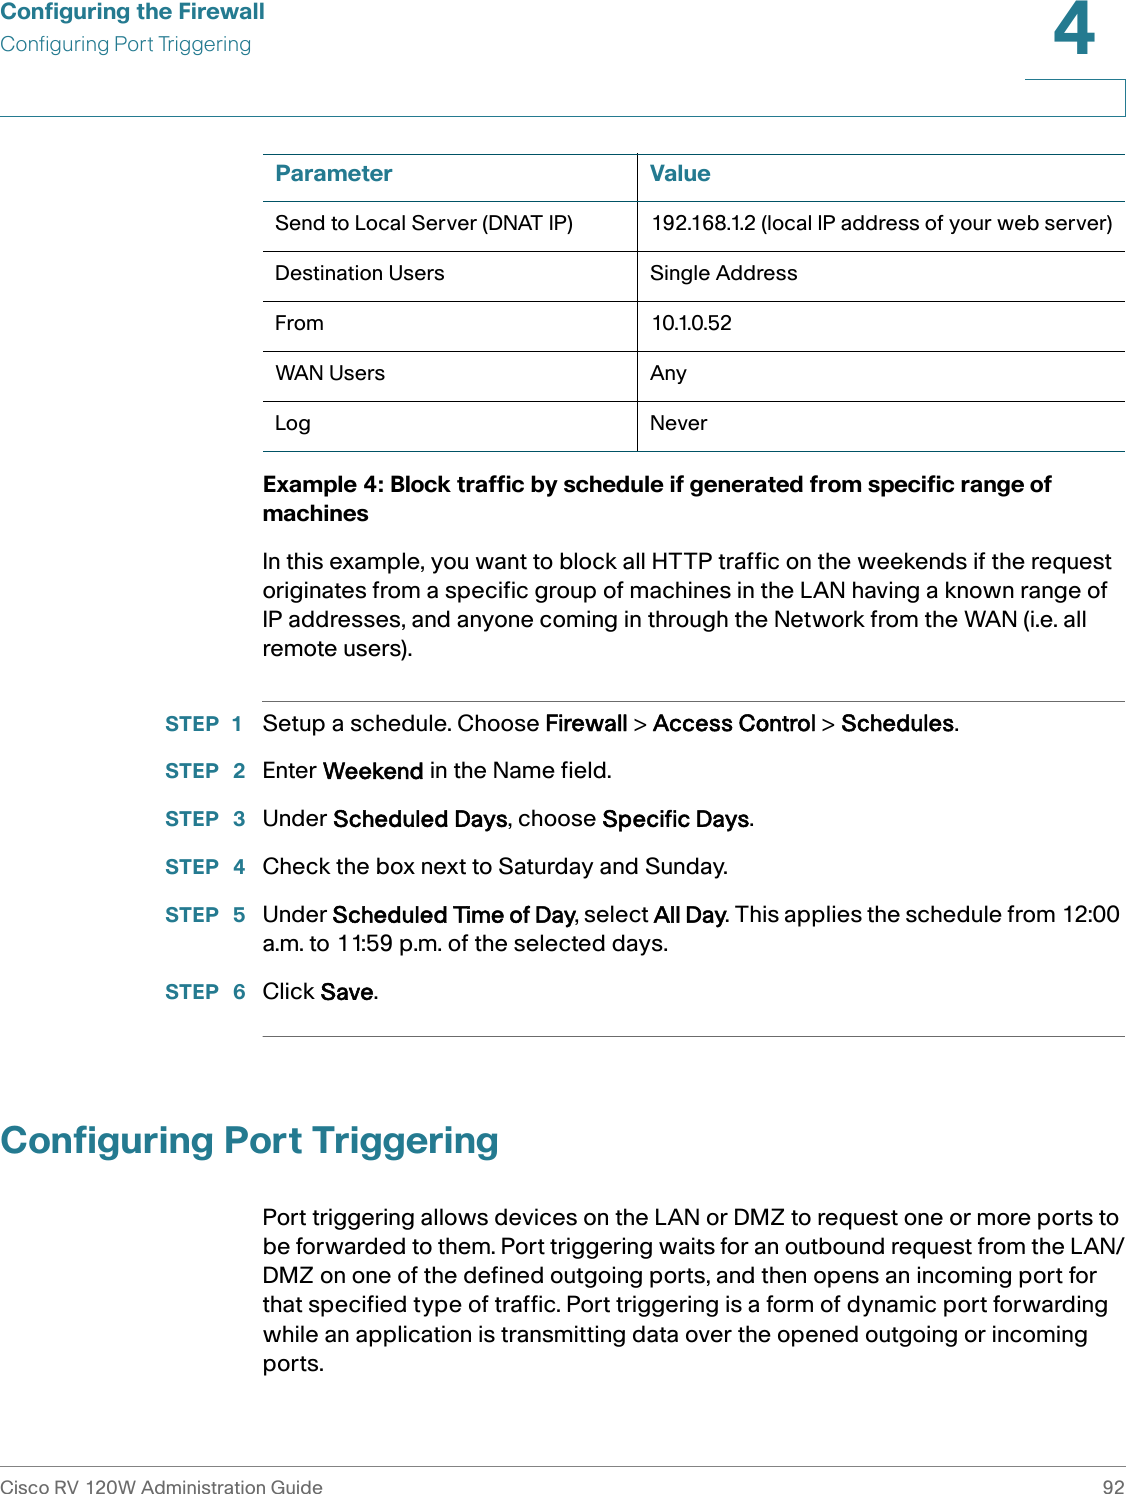 Configuring the FirewallConfiguring Port TriggeringCisco RV 120W Administration Guide 924 Example 4: Block traffic by schedule if generated from specific range of machinesIn this example, you want to block all HTTP traffic on the weekends if the request originates from a specific group of machines in the LAN having a known range of IP addresses, and anyone coming in through the Network from the WAN (i.e. all remote users).STEP 1 Setup a schedule. Choose Firewall &gt; Access Control &gt; Schedules.STEP  2 Enter Weekend in the Name field.STEP  3 Under Scheduled Days, choose Specific Days.STEP  4 Check the box next to Saturday and Sunday.STEP  5 Under Scheduled Time of Day, select All Day. This applies the schedule from 12:00 a.m. to 11:59 p.m. of the selected days.STEP  6 Click Save.Configuring Port TriggeringPort triggering allows devices on the LAN or DMZ to request one or more ports to be forwarded to them. Port triggering waits for an outbound request from the LAN/DMZ on one of the defined outgoing ports, and then opens an incoming port for that specified type of traffic. Port triggering is a form of dynamic port forwarding while an application is transmitting data over the opened outgoing or incoming ports.Send to Local Server (DNAT IP) 192.168.1.2 (local IP address of your web server)Destination Users Single AddressFrom 10.1.0.52WAN Users AnyLog NeverParameter Value